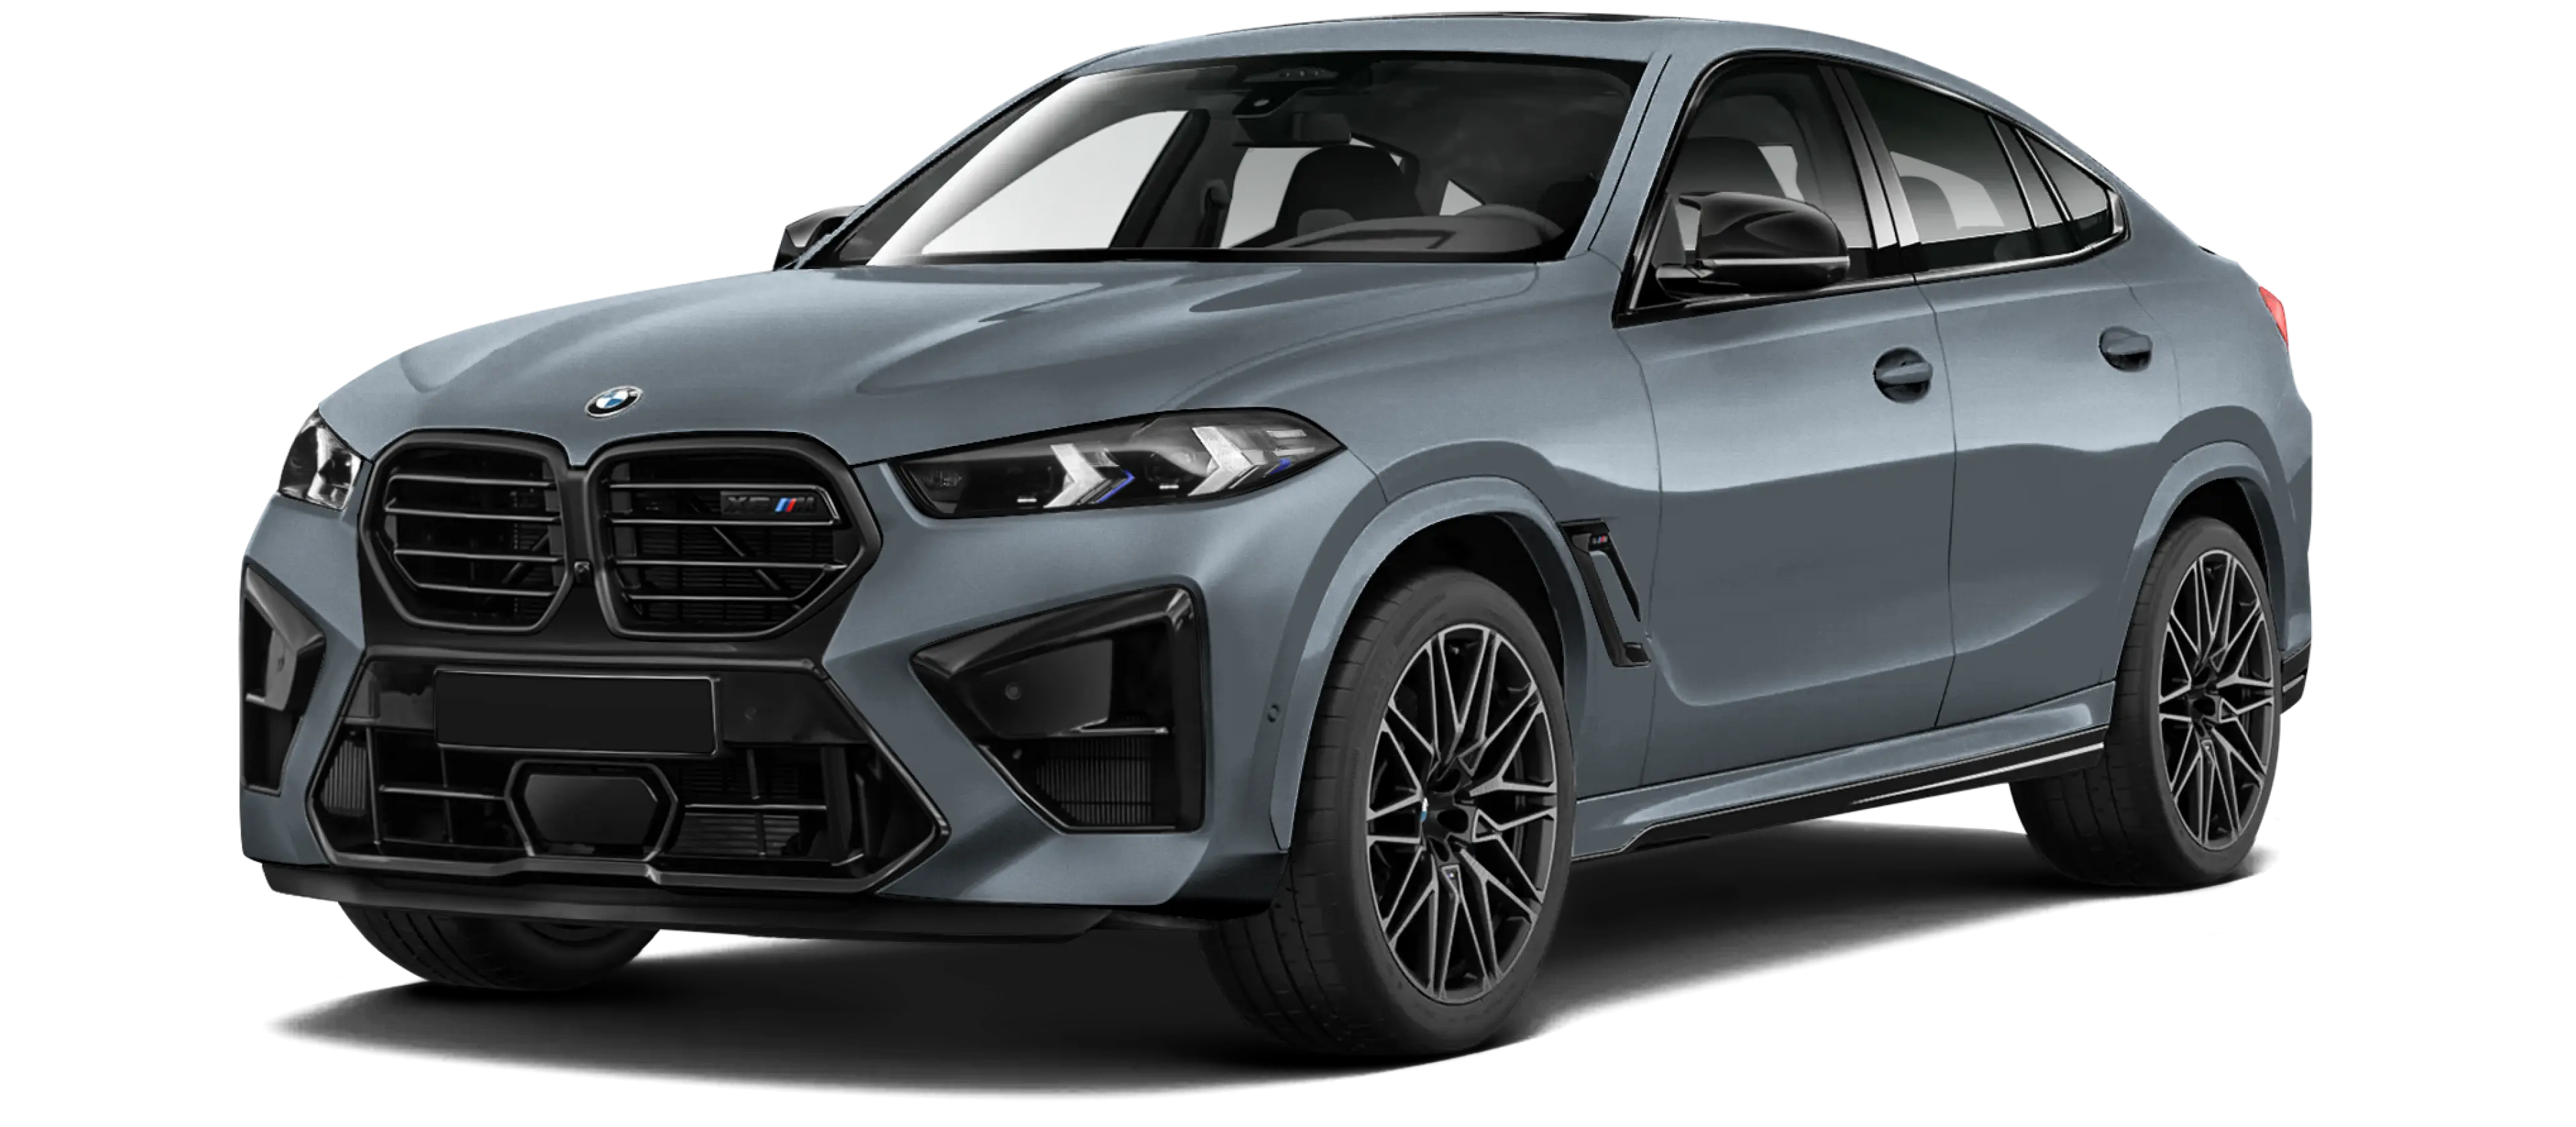 BMW X6M F96 LCI 2023 stock front view in Frosty clean gray